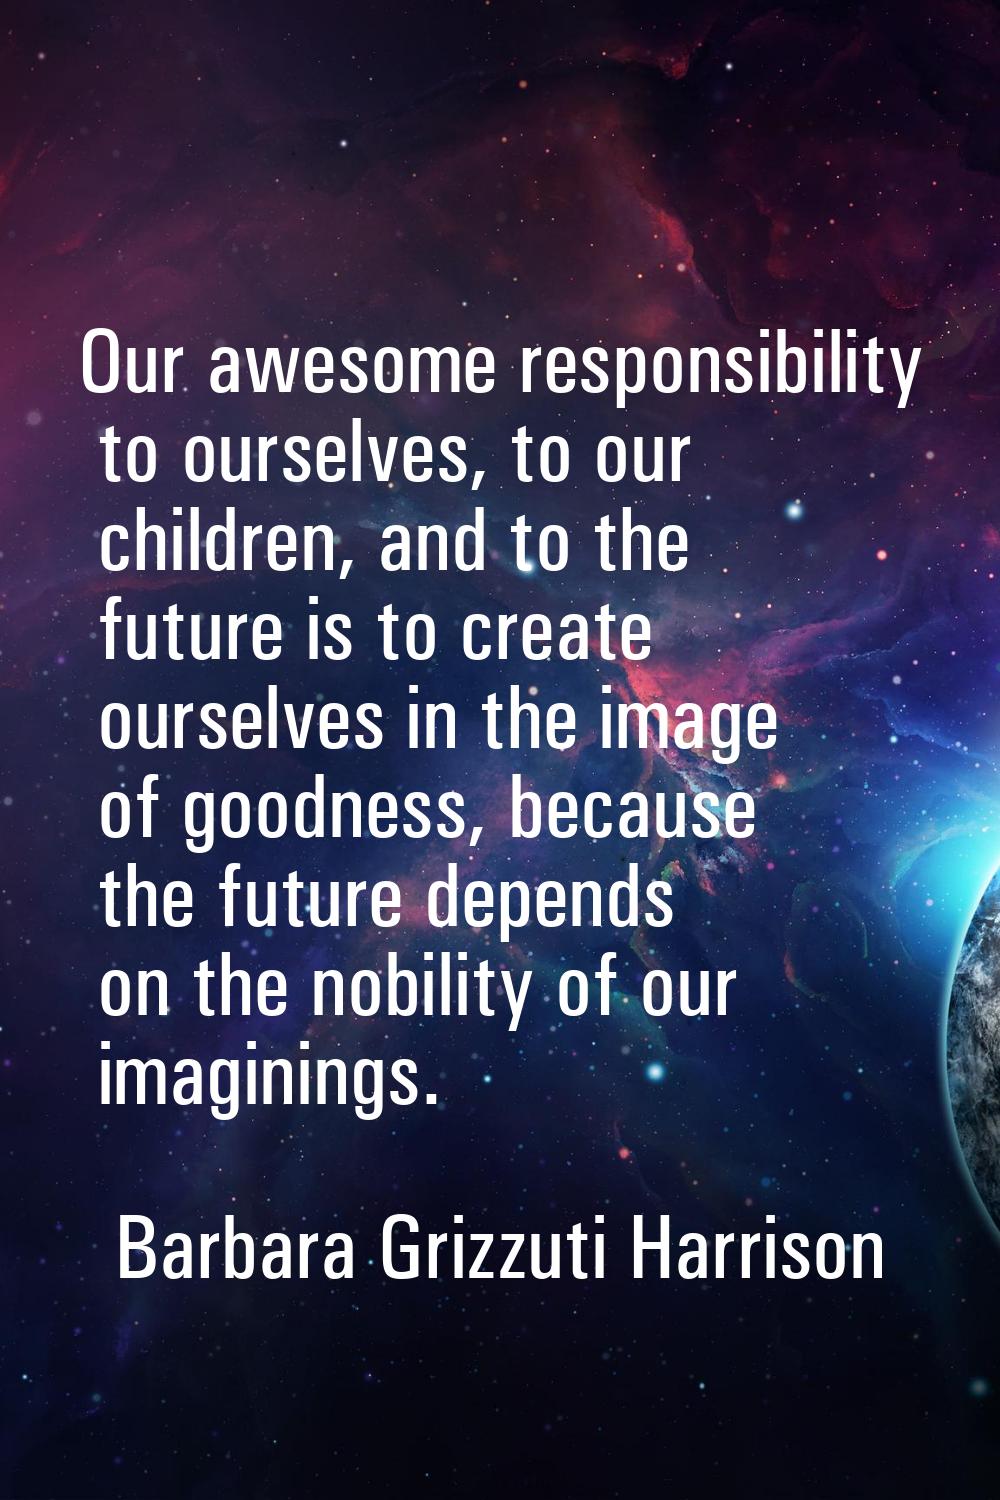 Our awesome responsibility to ourselves, to our children, and to the future is to create ourselves 